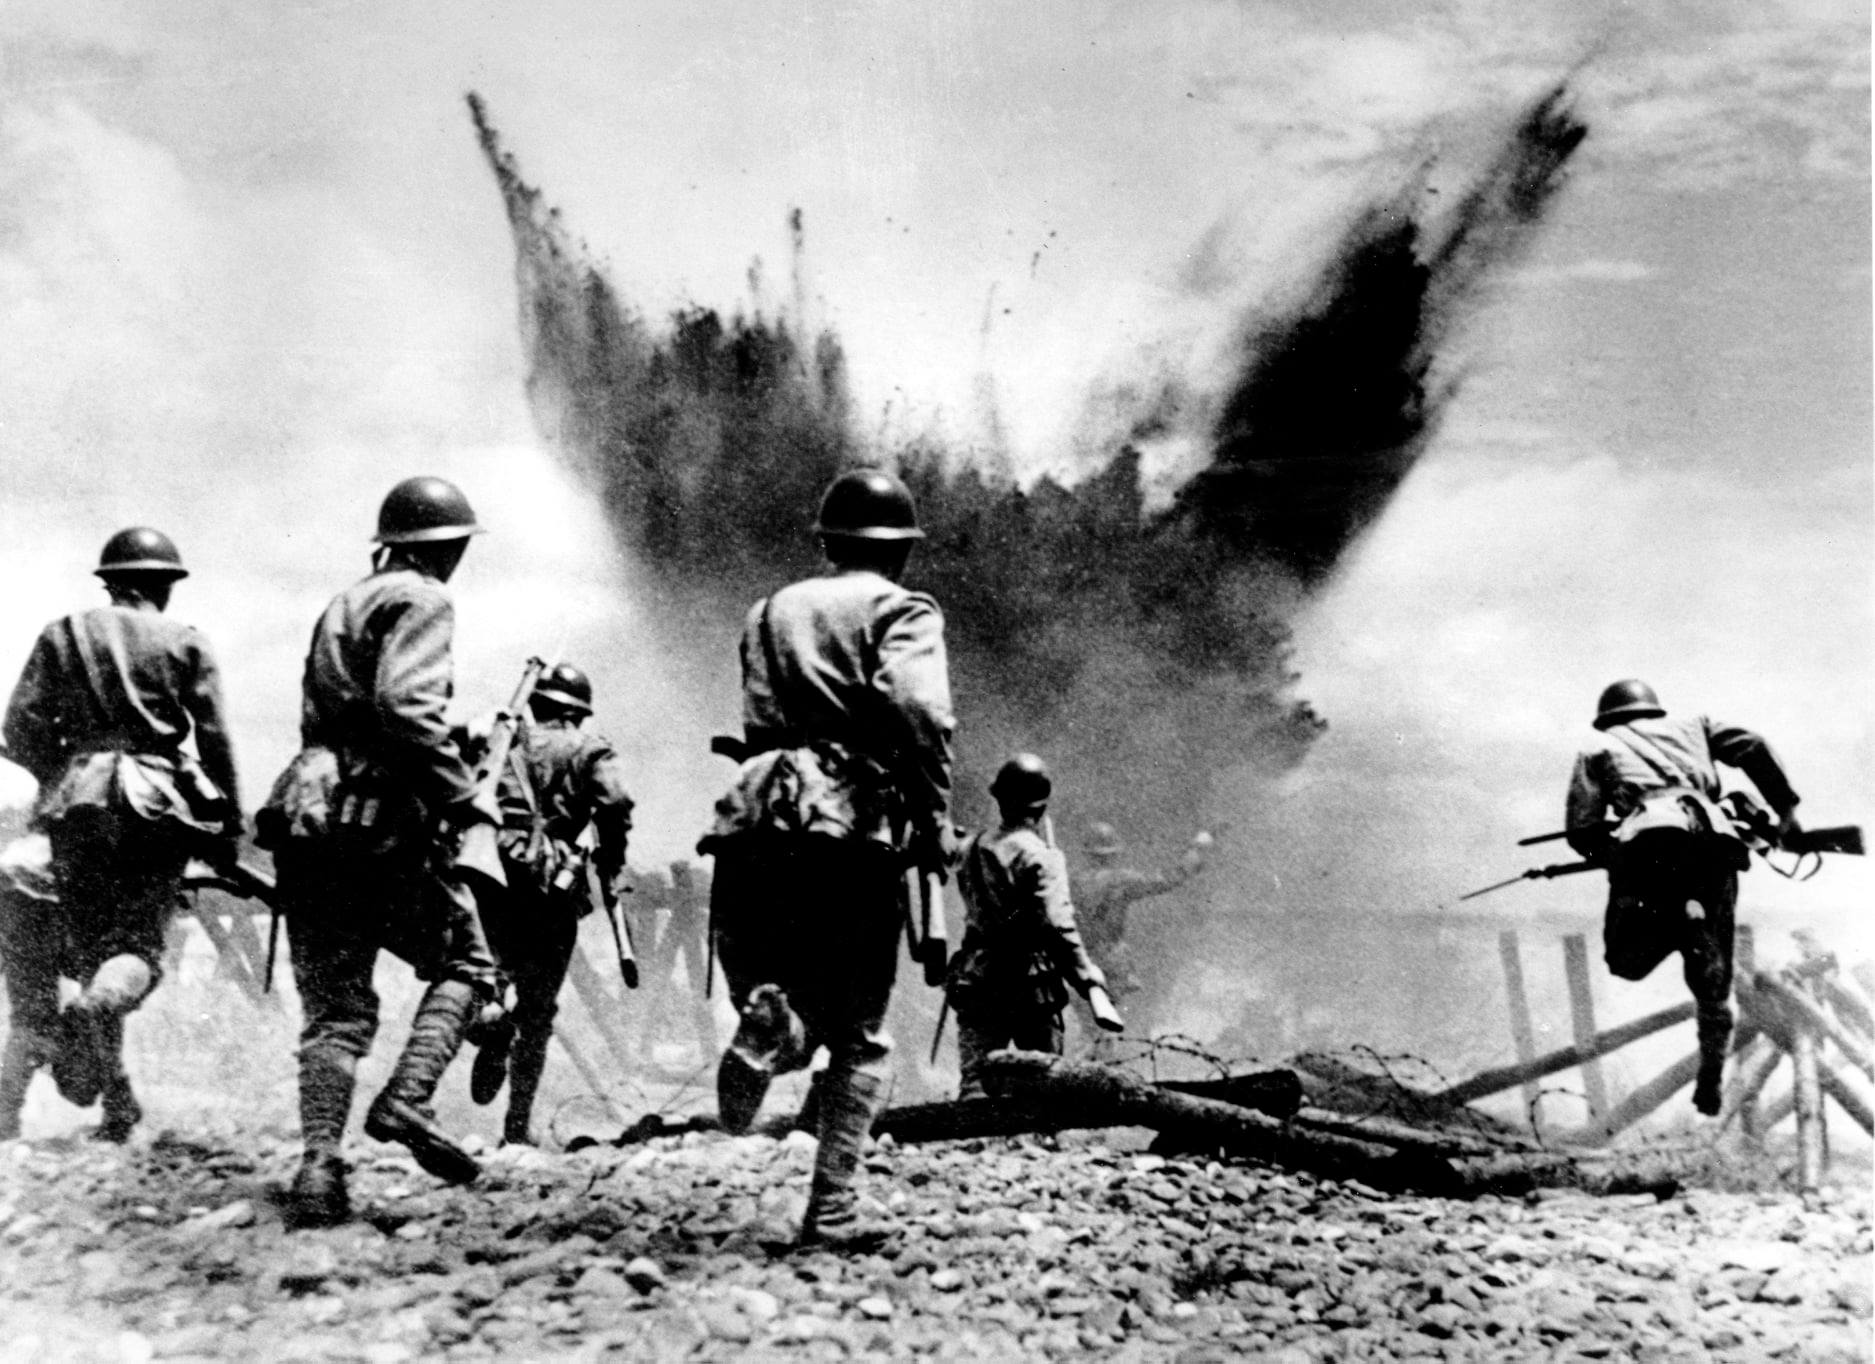 Japanese soldiers charging ww2